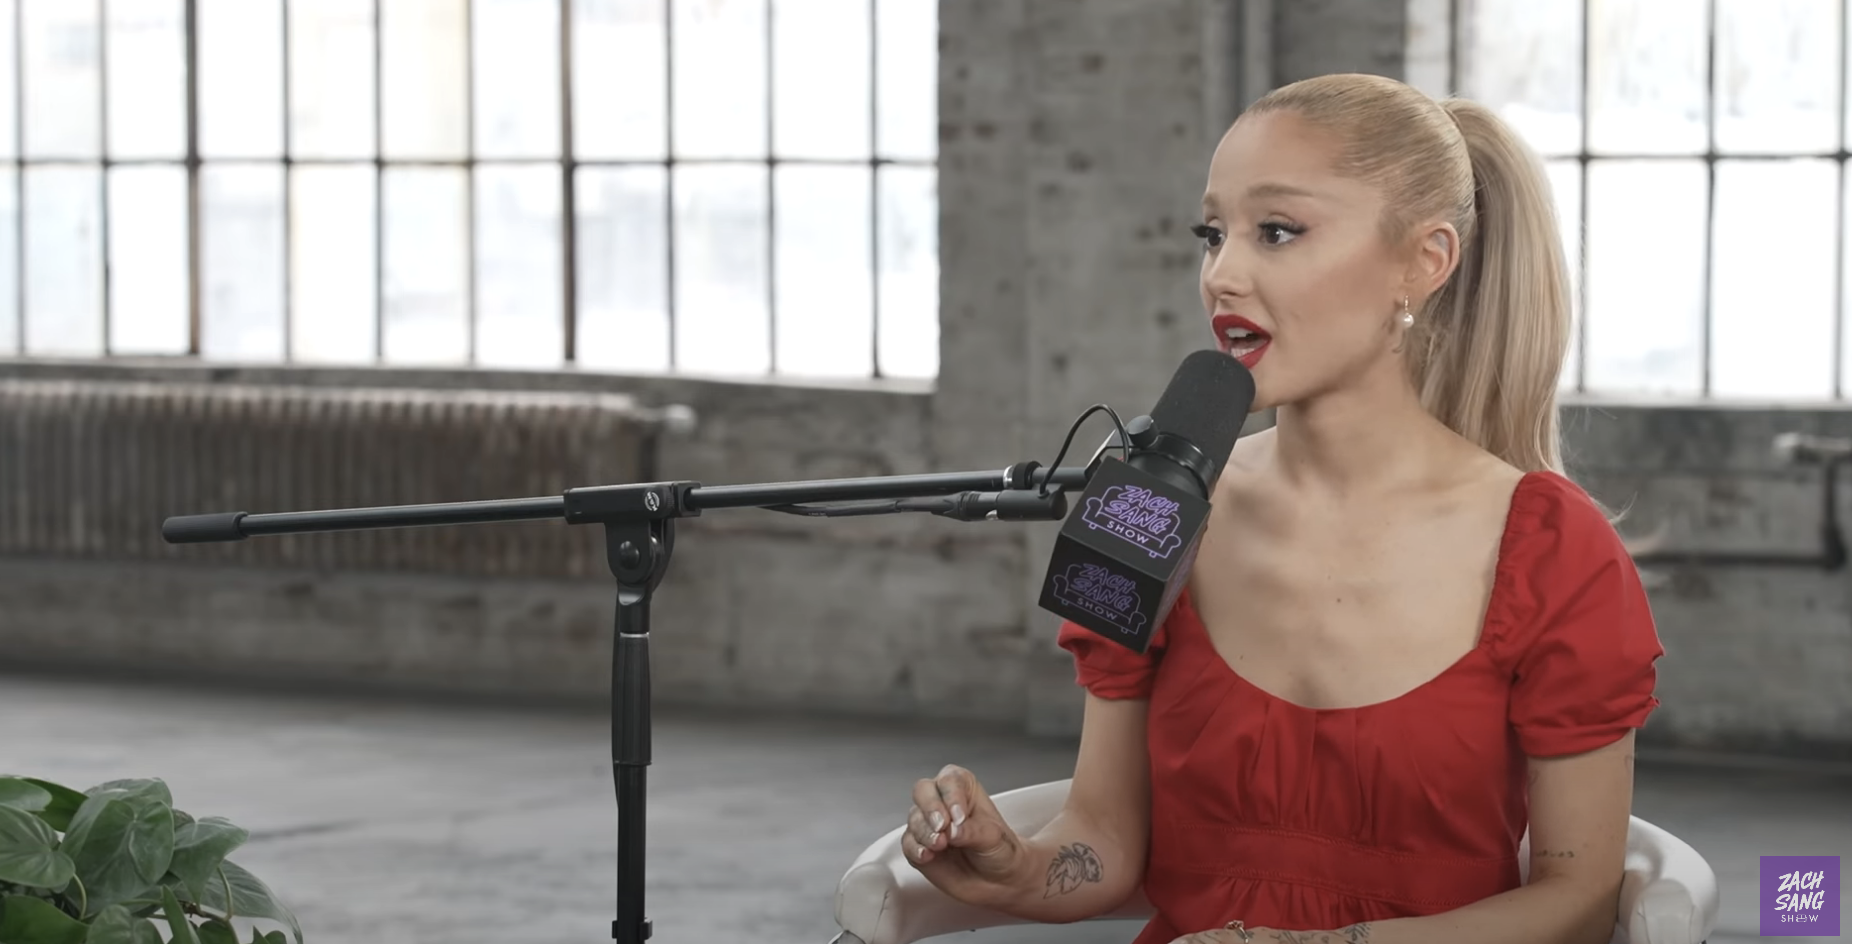 Ariana Grande in a red dress speaking into a microphone during an interview